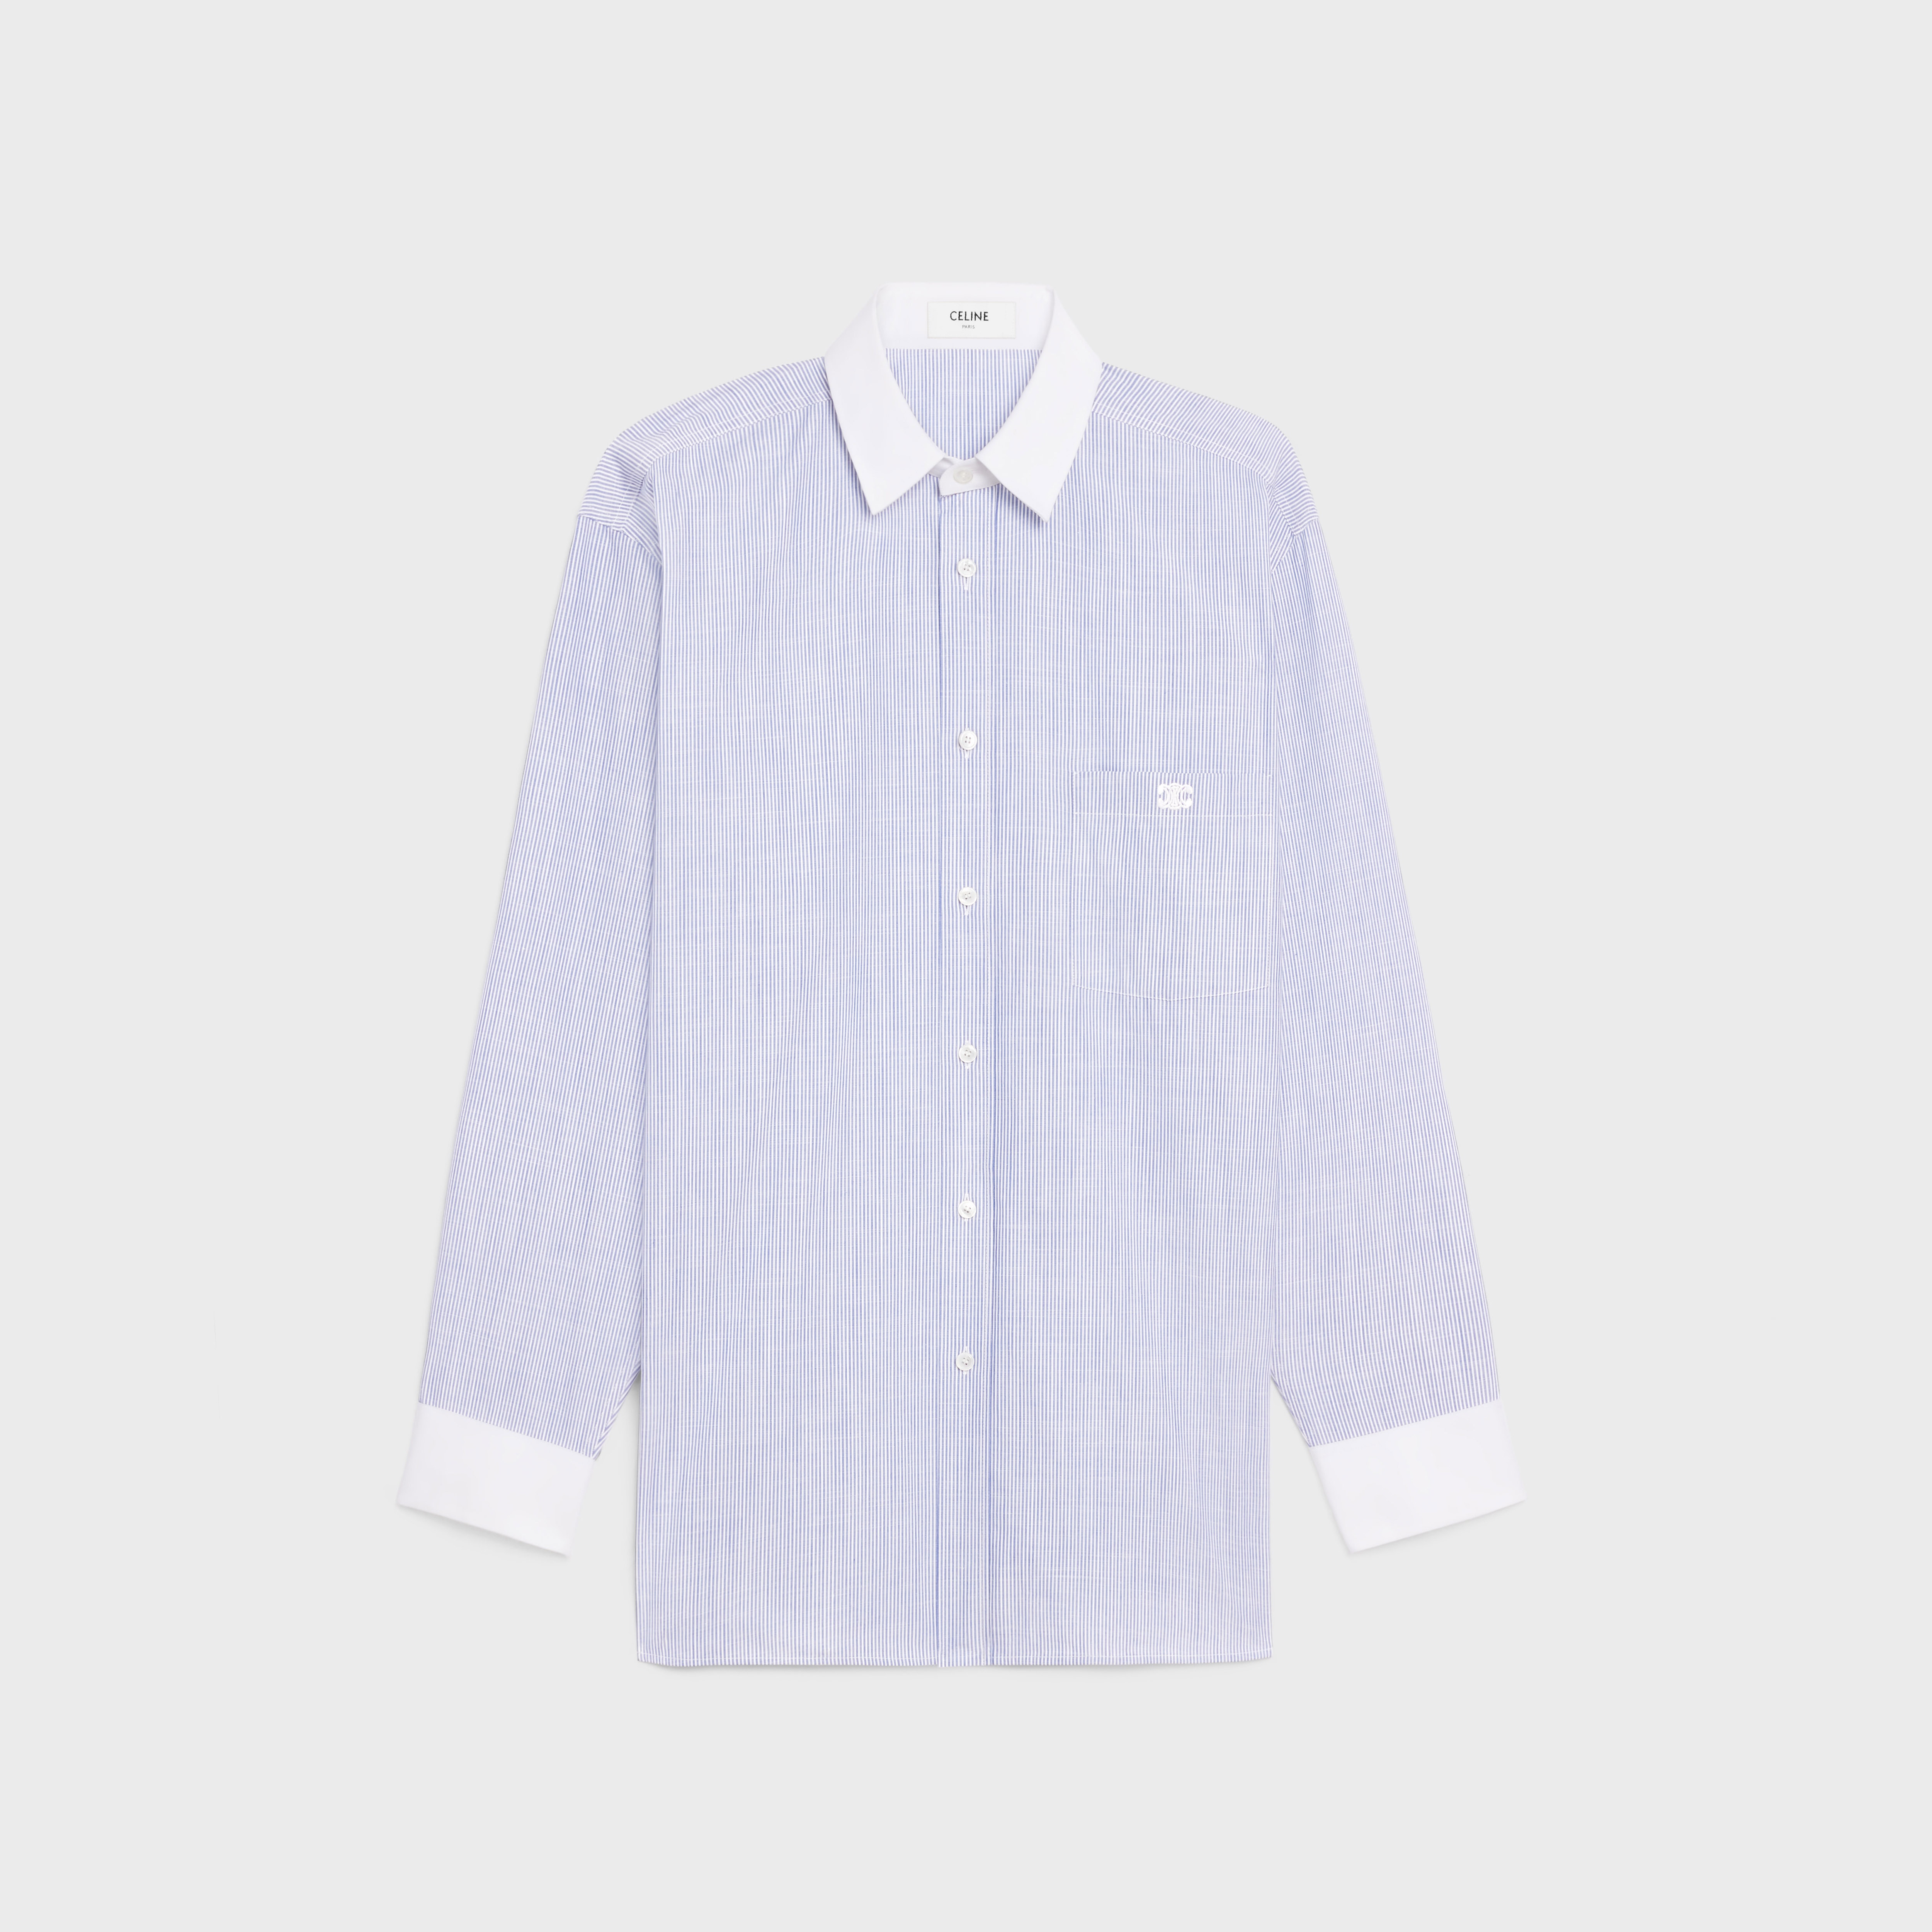 OVERSIZED SHIRT IN STRIPED COTTON - 1